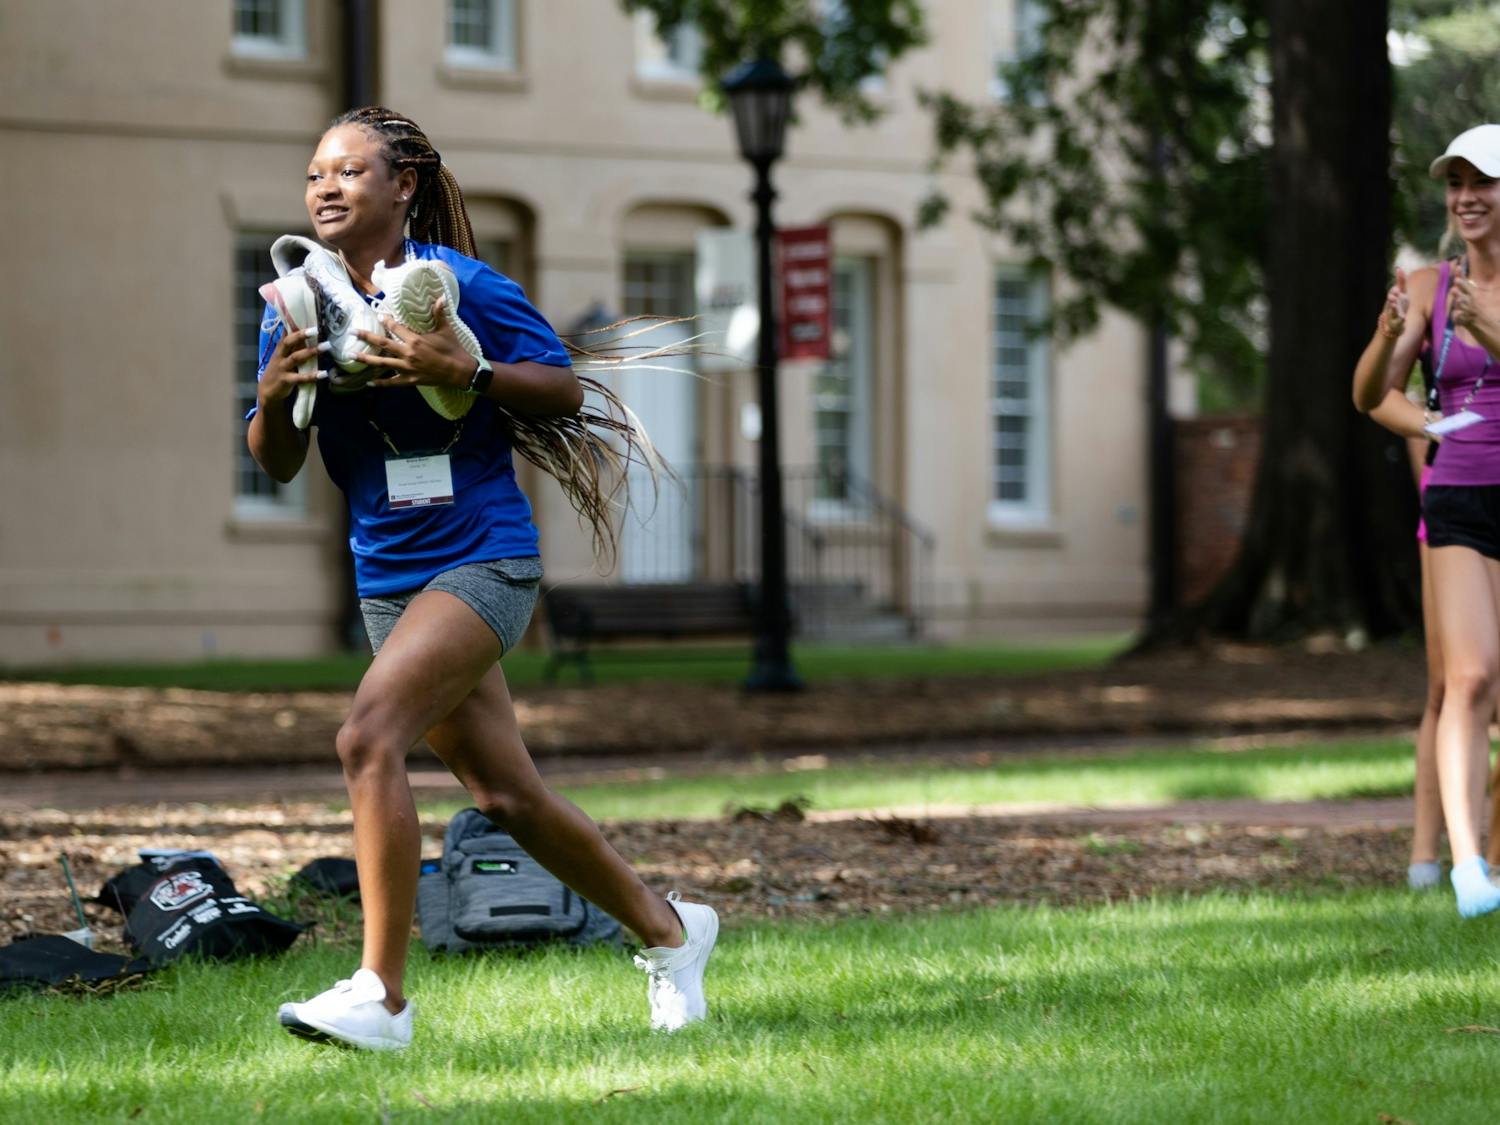 A first-year student runs toward her orientation leaders, attempting to be the first student to bring them four shoes. This game is played during orientation sessions throughout the summer to help new students have fun and make friends before starting their freshman year in the fall.